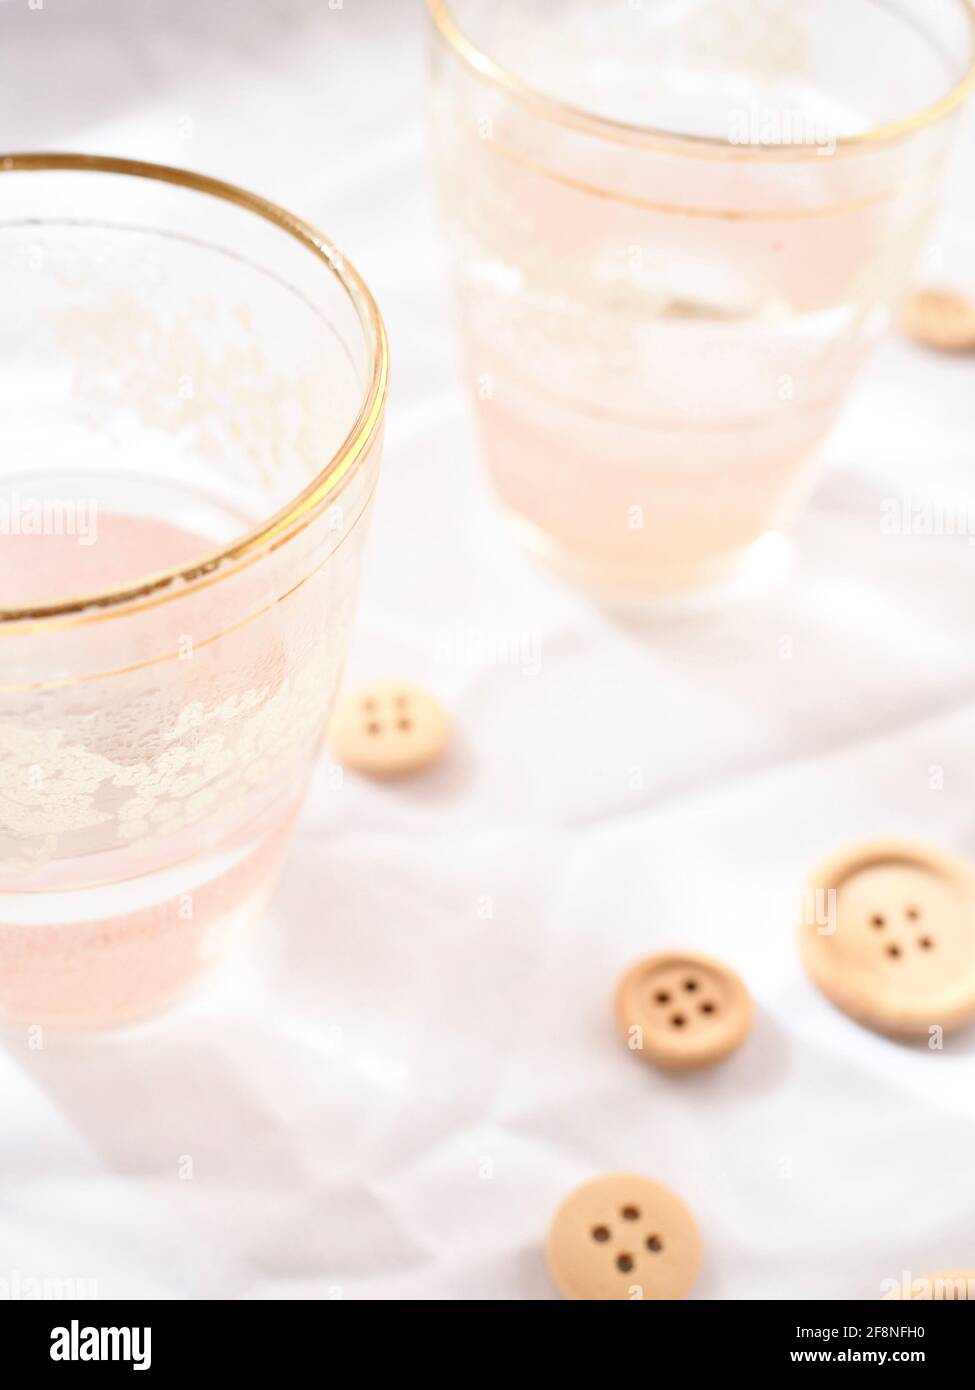 Pretty pink glasses and wooden buttons on a bright white background. Stock Photo